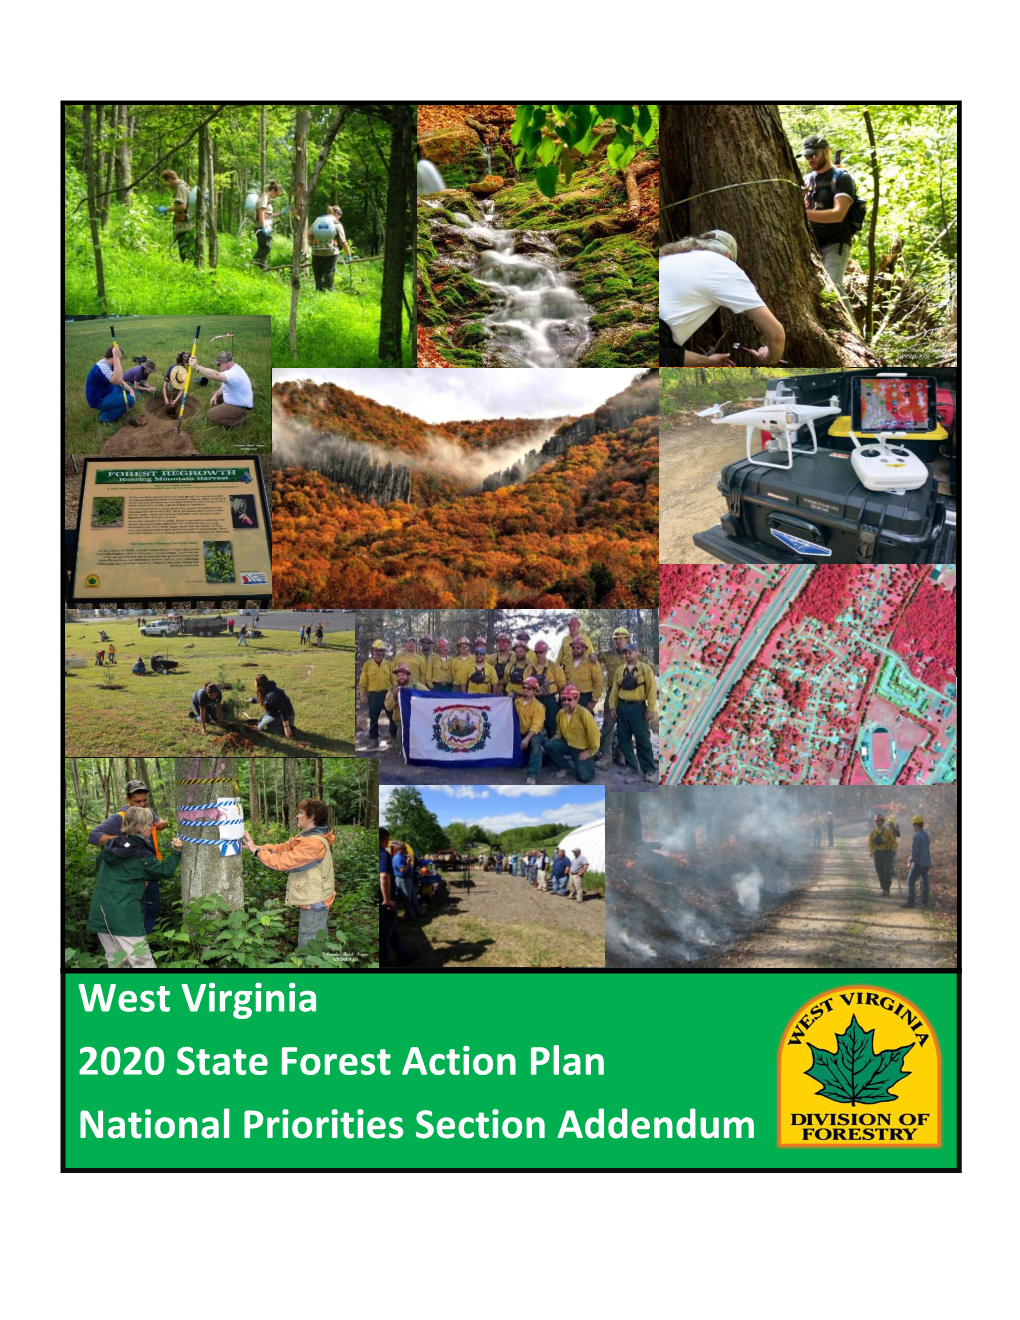 West Virginia 2020 State Forest Action Plan National Priorities Section